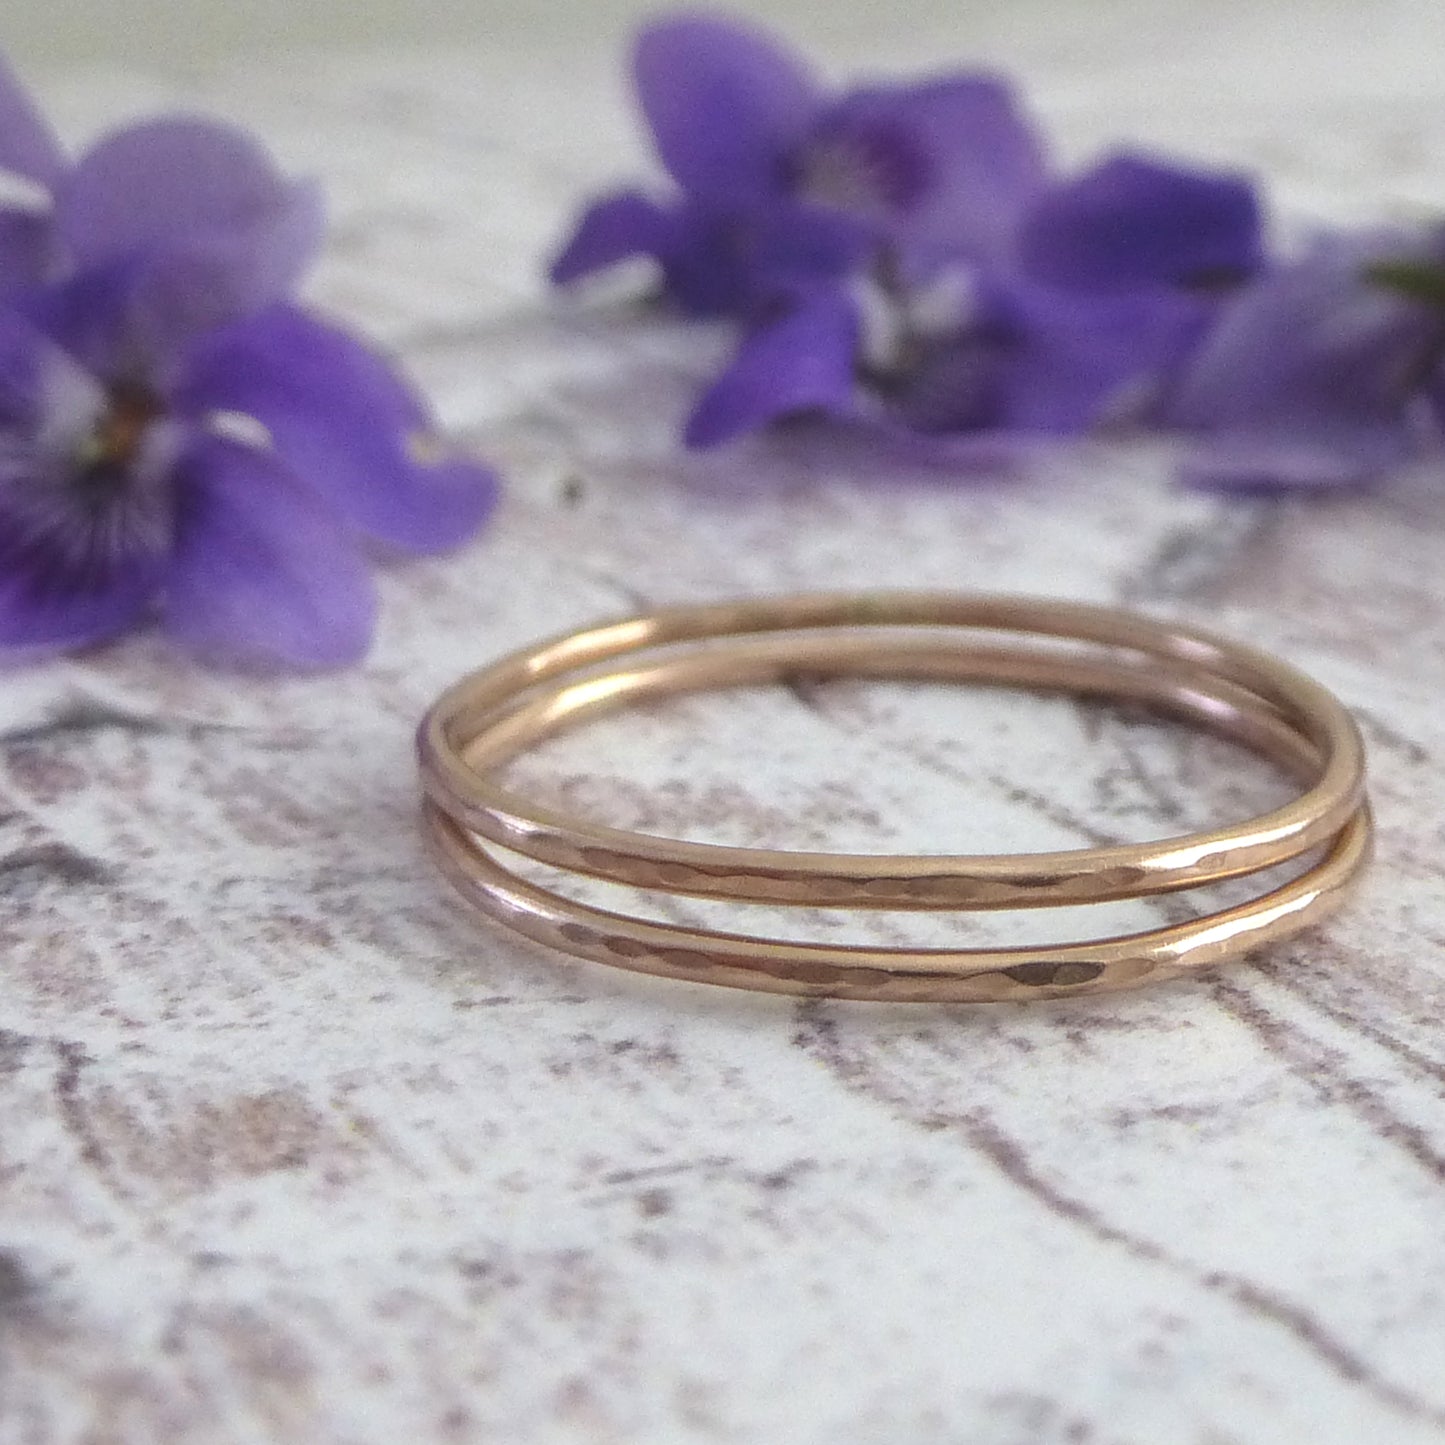 Skinny hammered band ring - 9ct rose gold